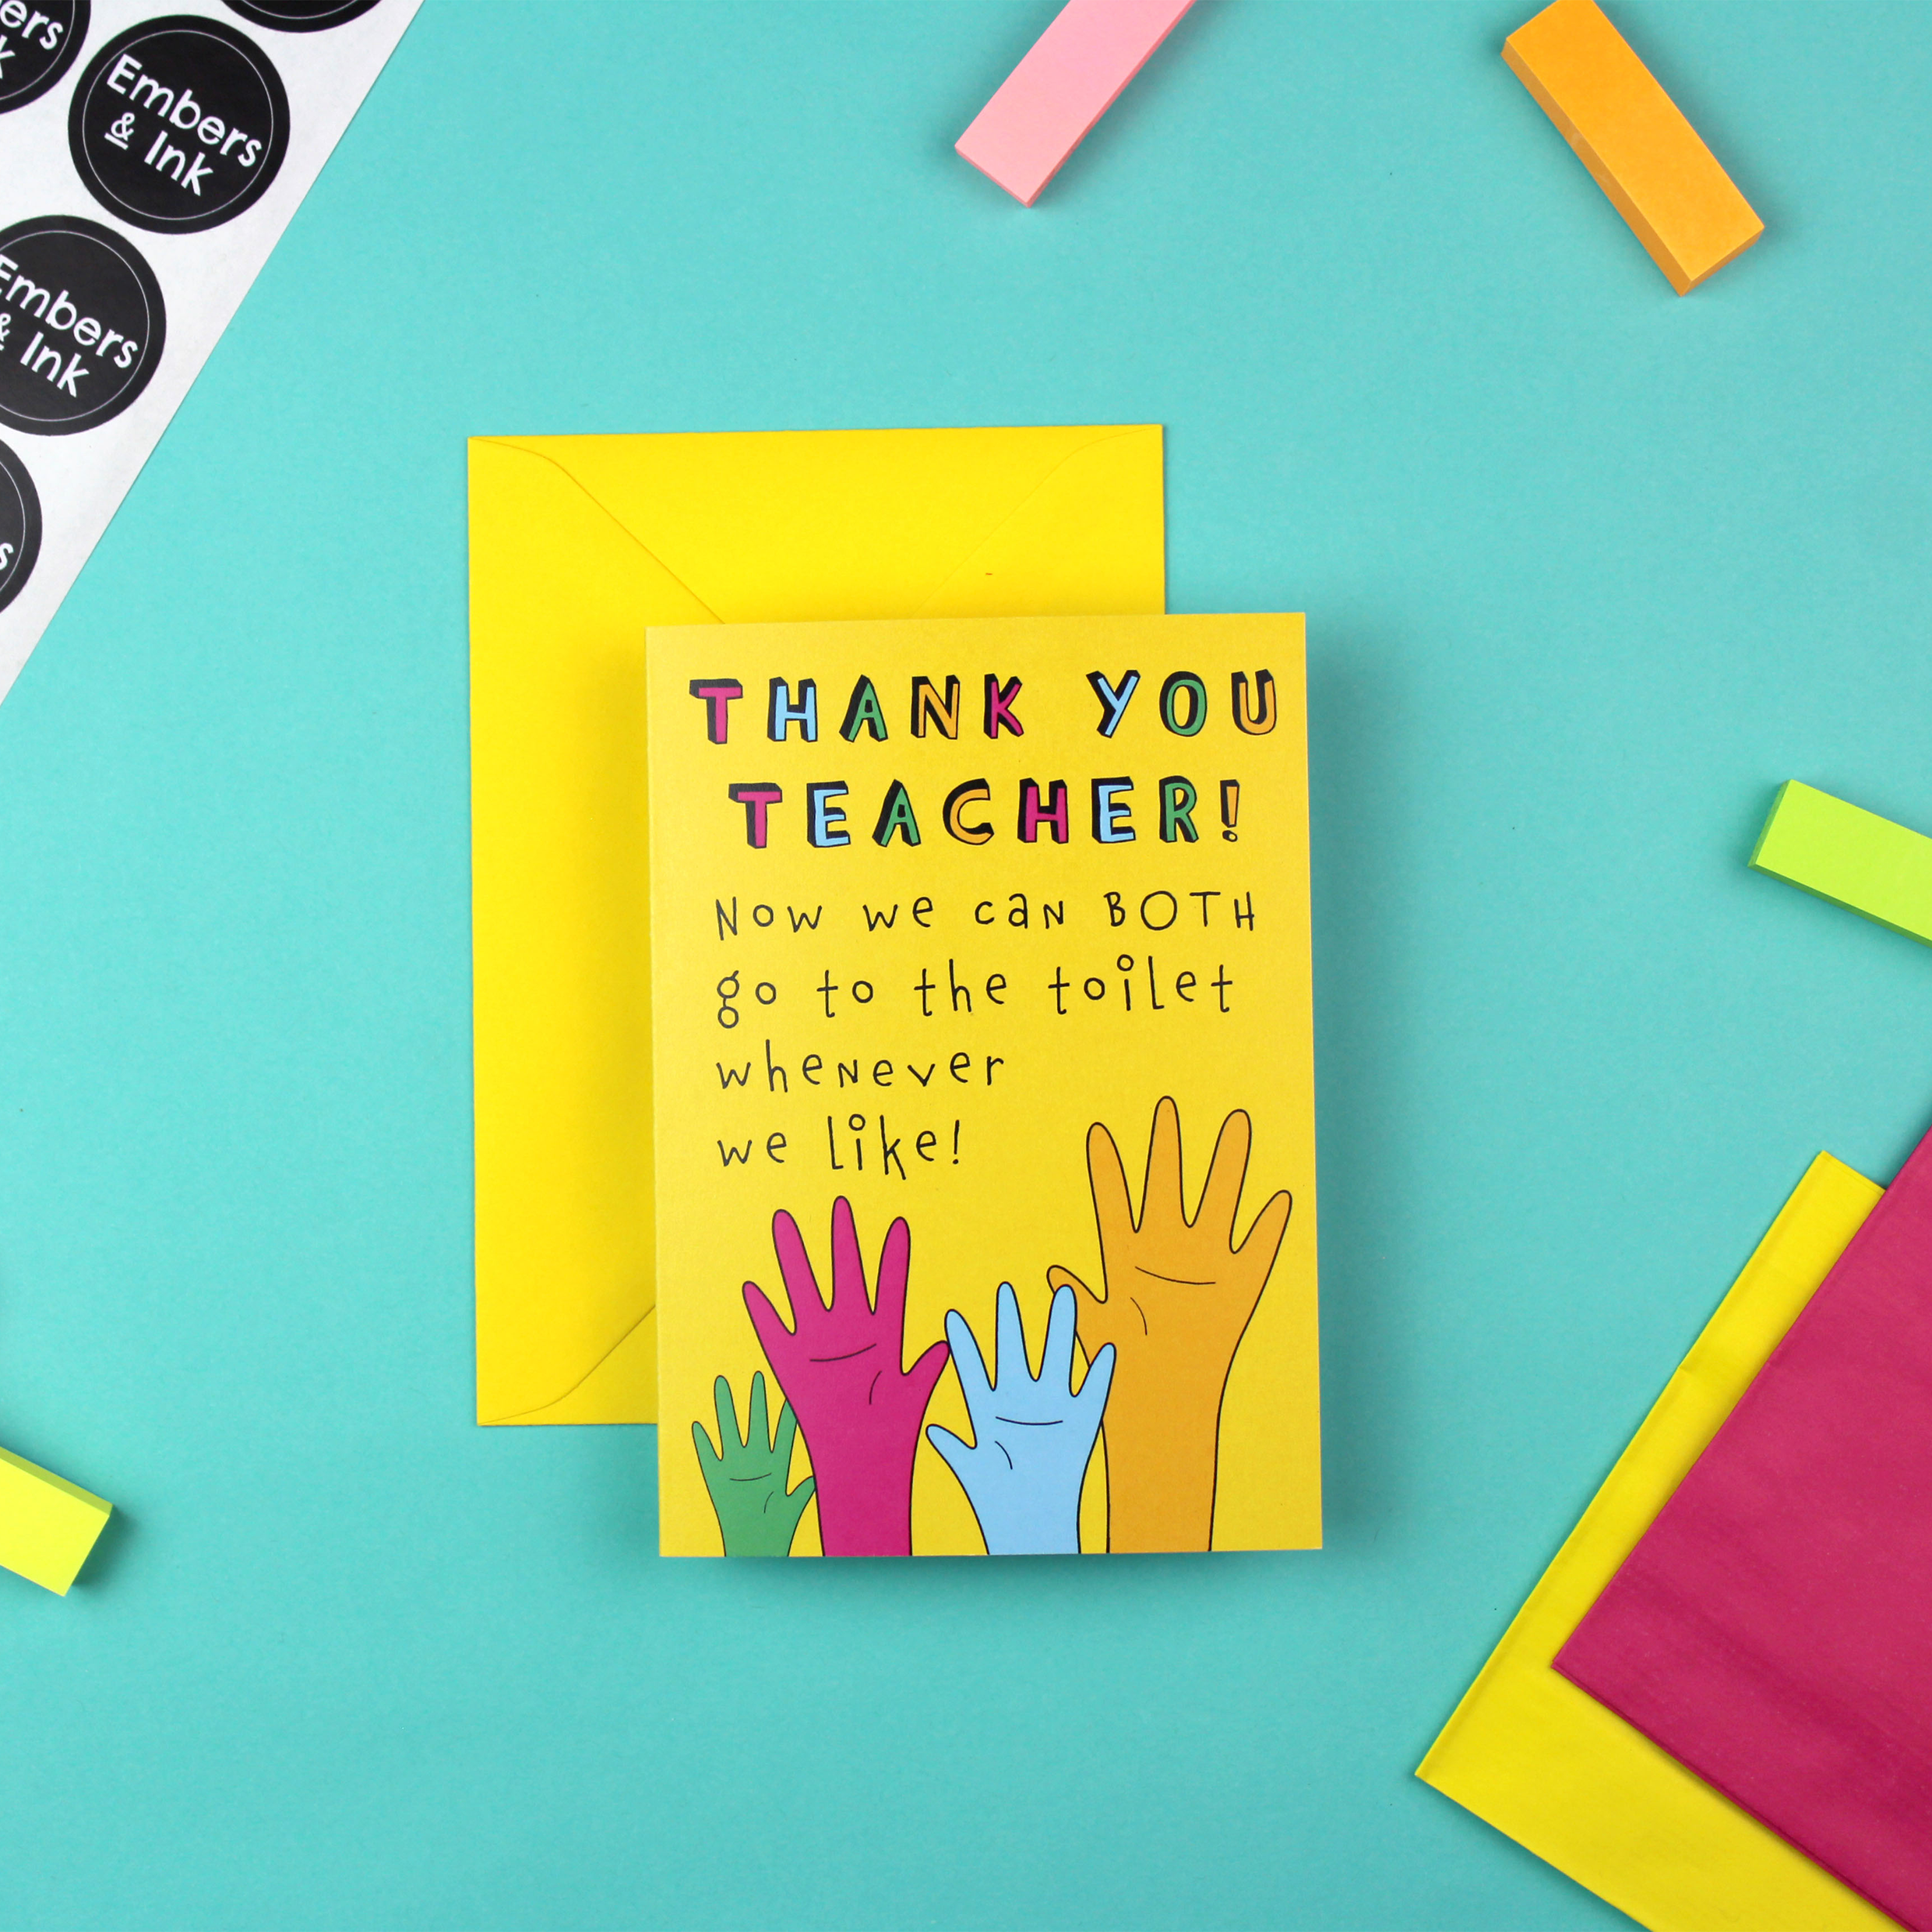 Image shows a yellow card with a yellow envelope. The card has an illustration of four raised hands in green, pink, blue and orange. Above the hands are the words 'Thank You Teacher, now we can both go to the toilet whenever we like'.